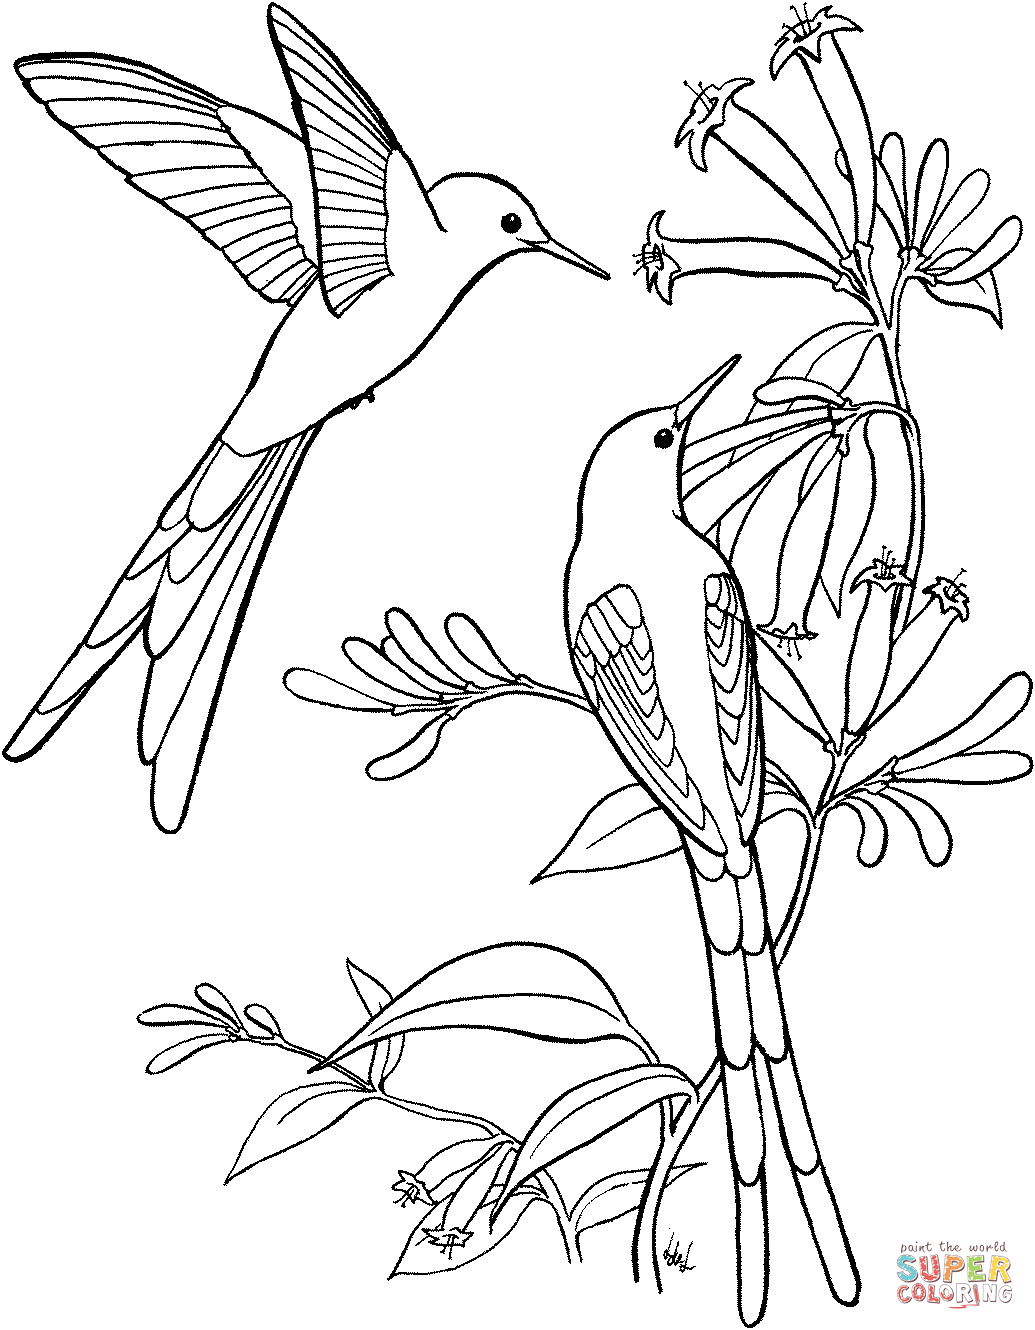 Hummingbird coloring pages to download and print for free